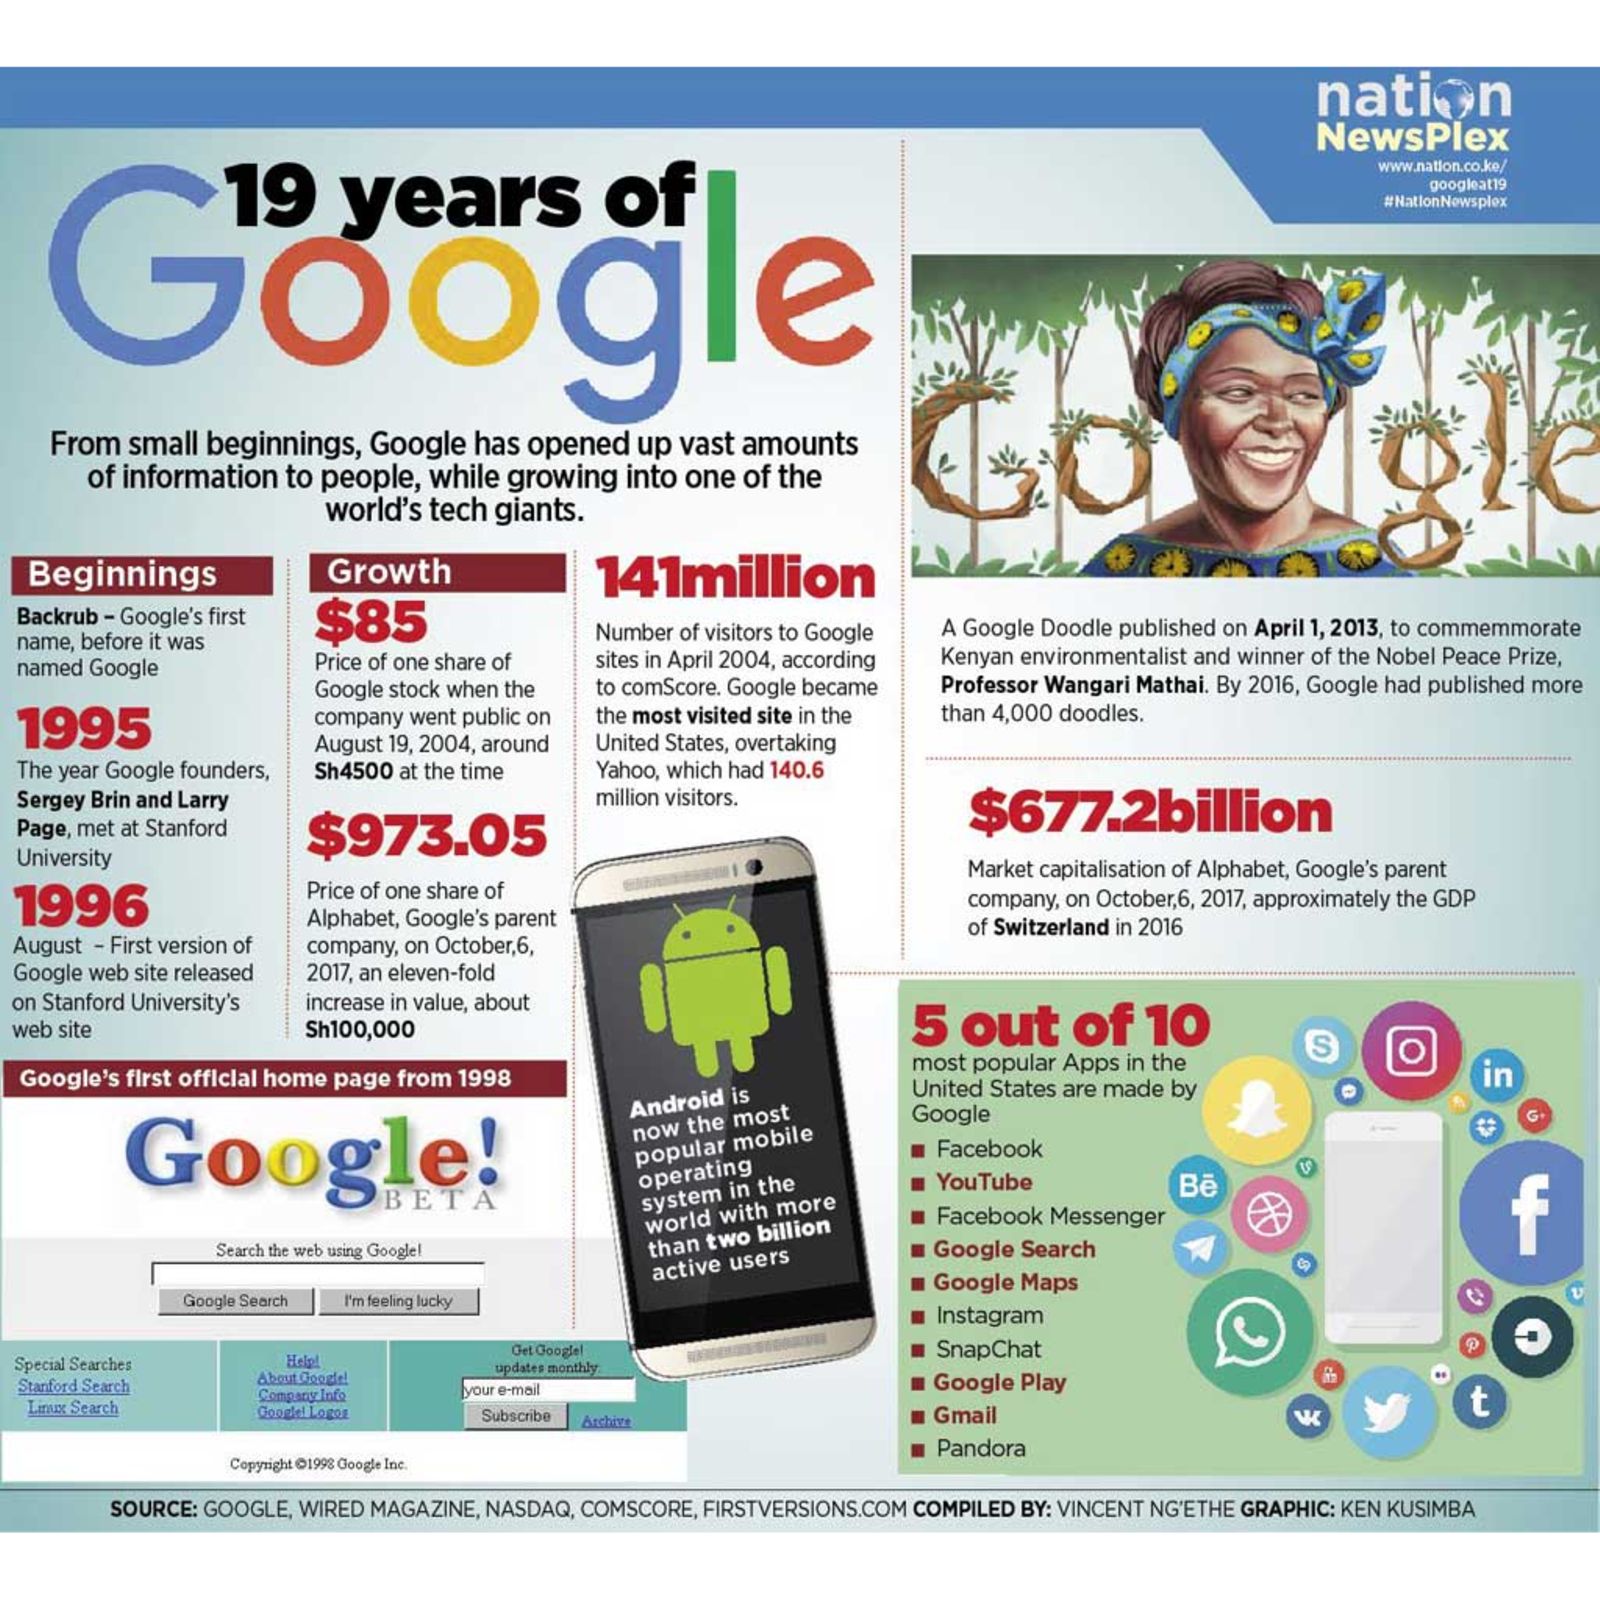 Google Operating System: August 2016